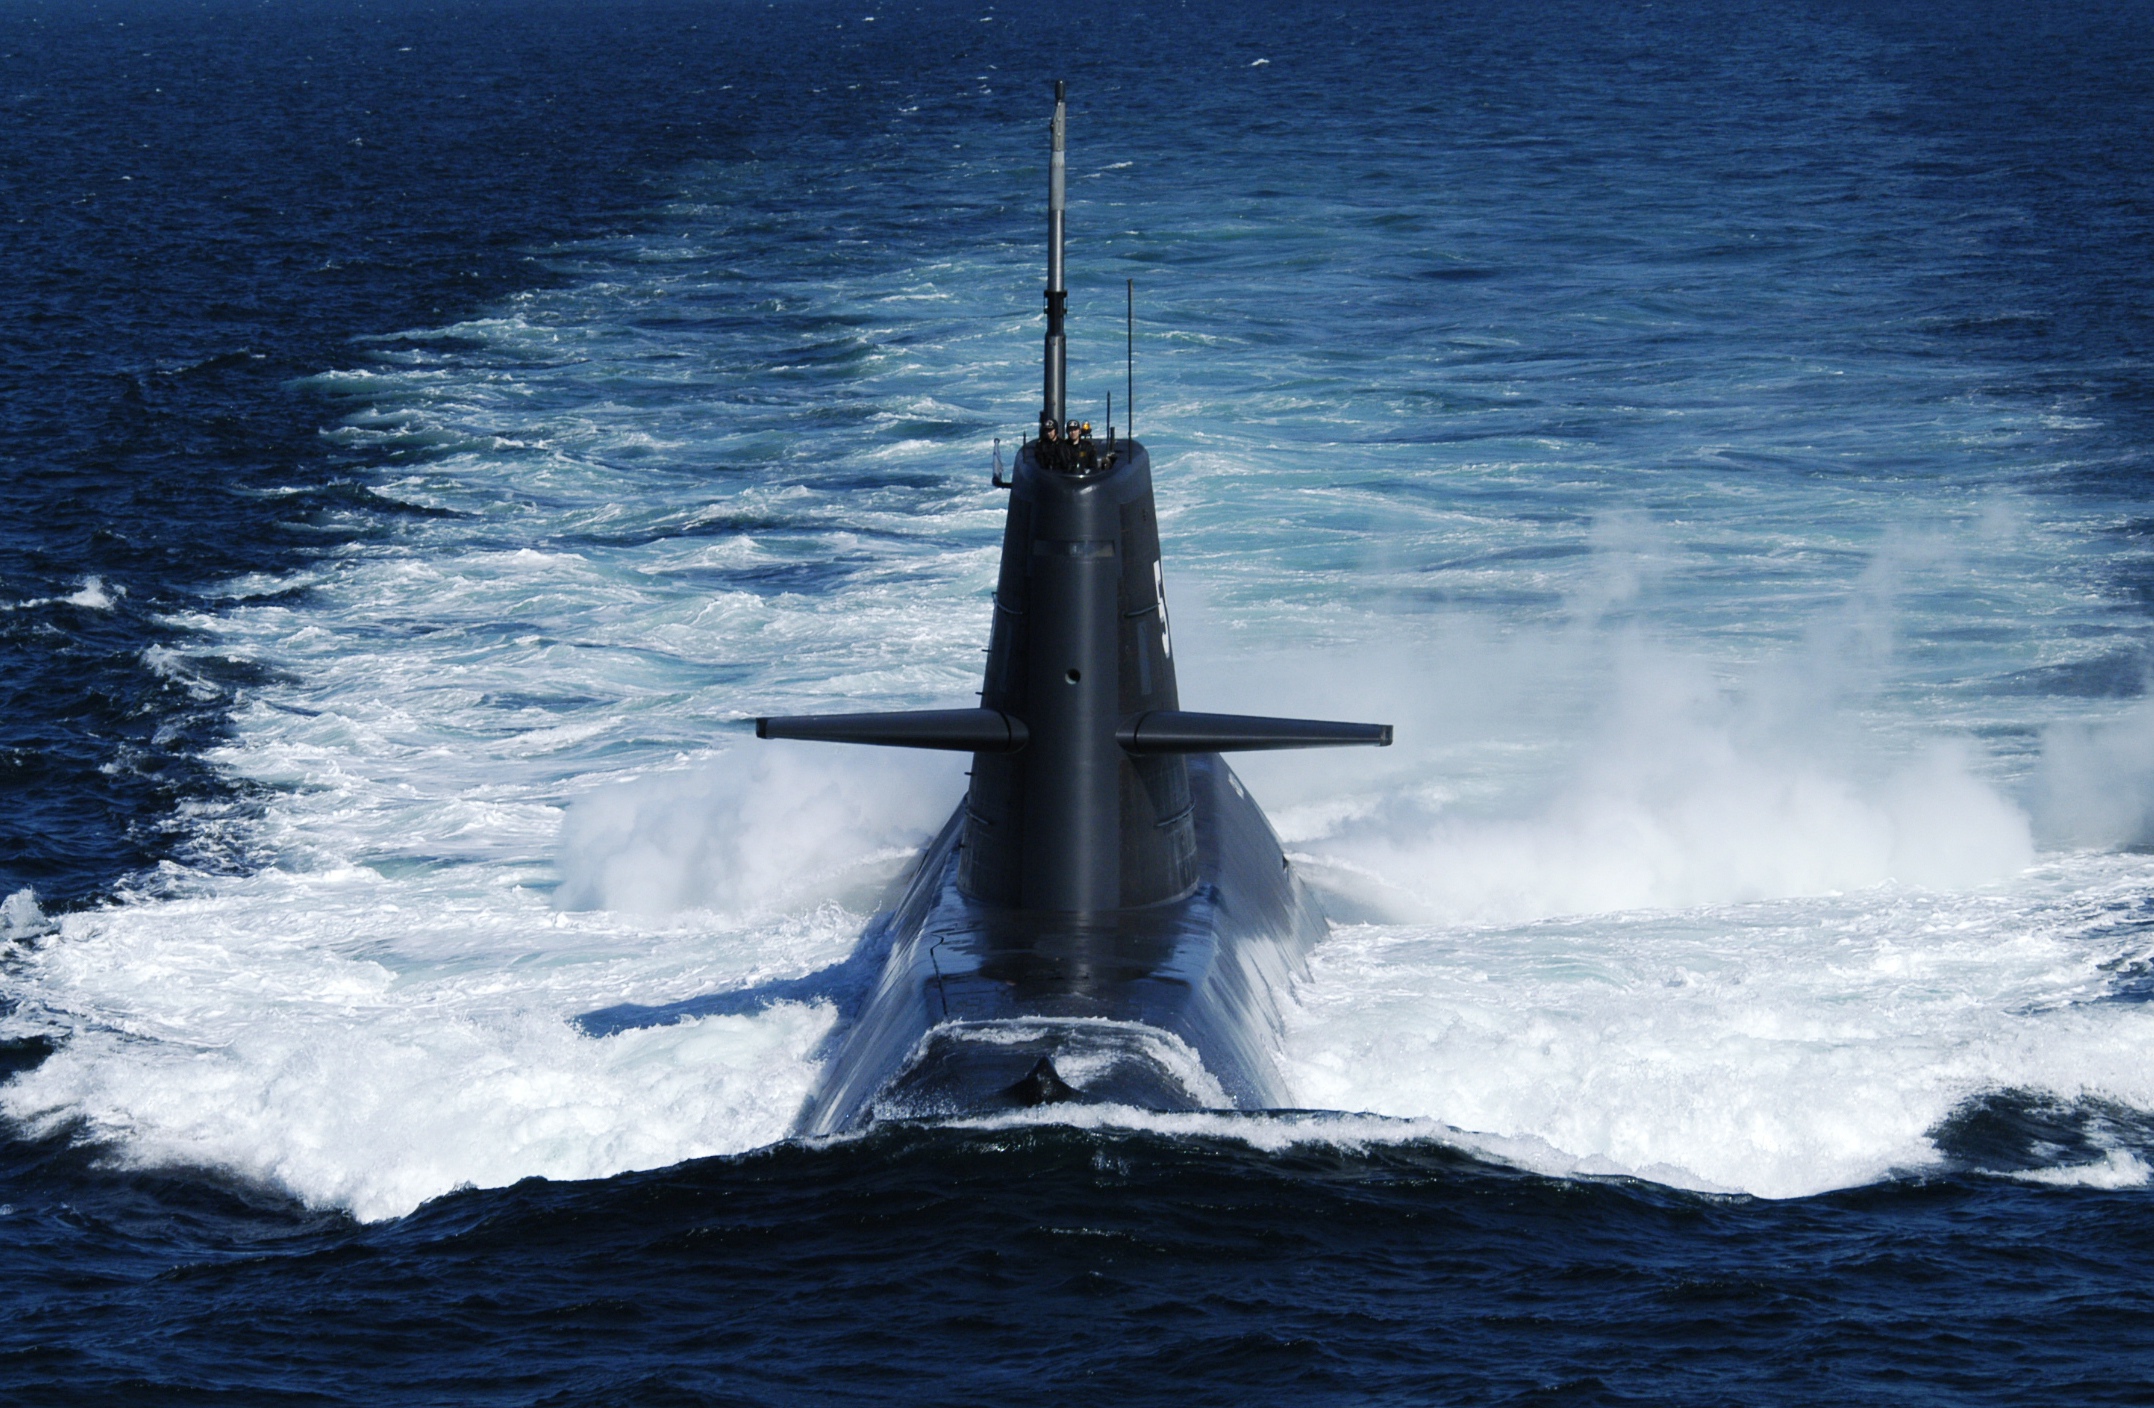 French submarine purchases are at risk of collapse